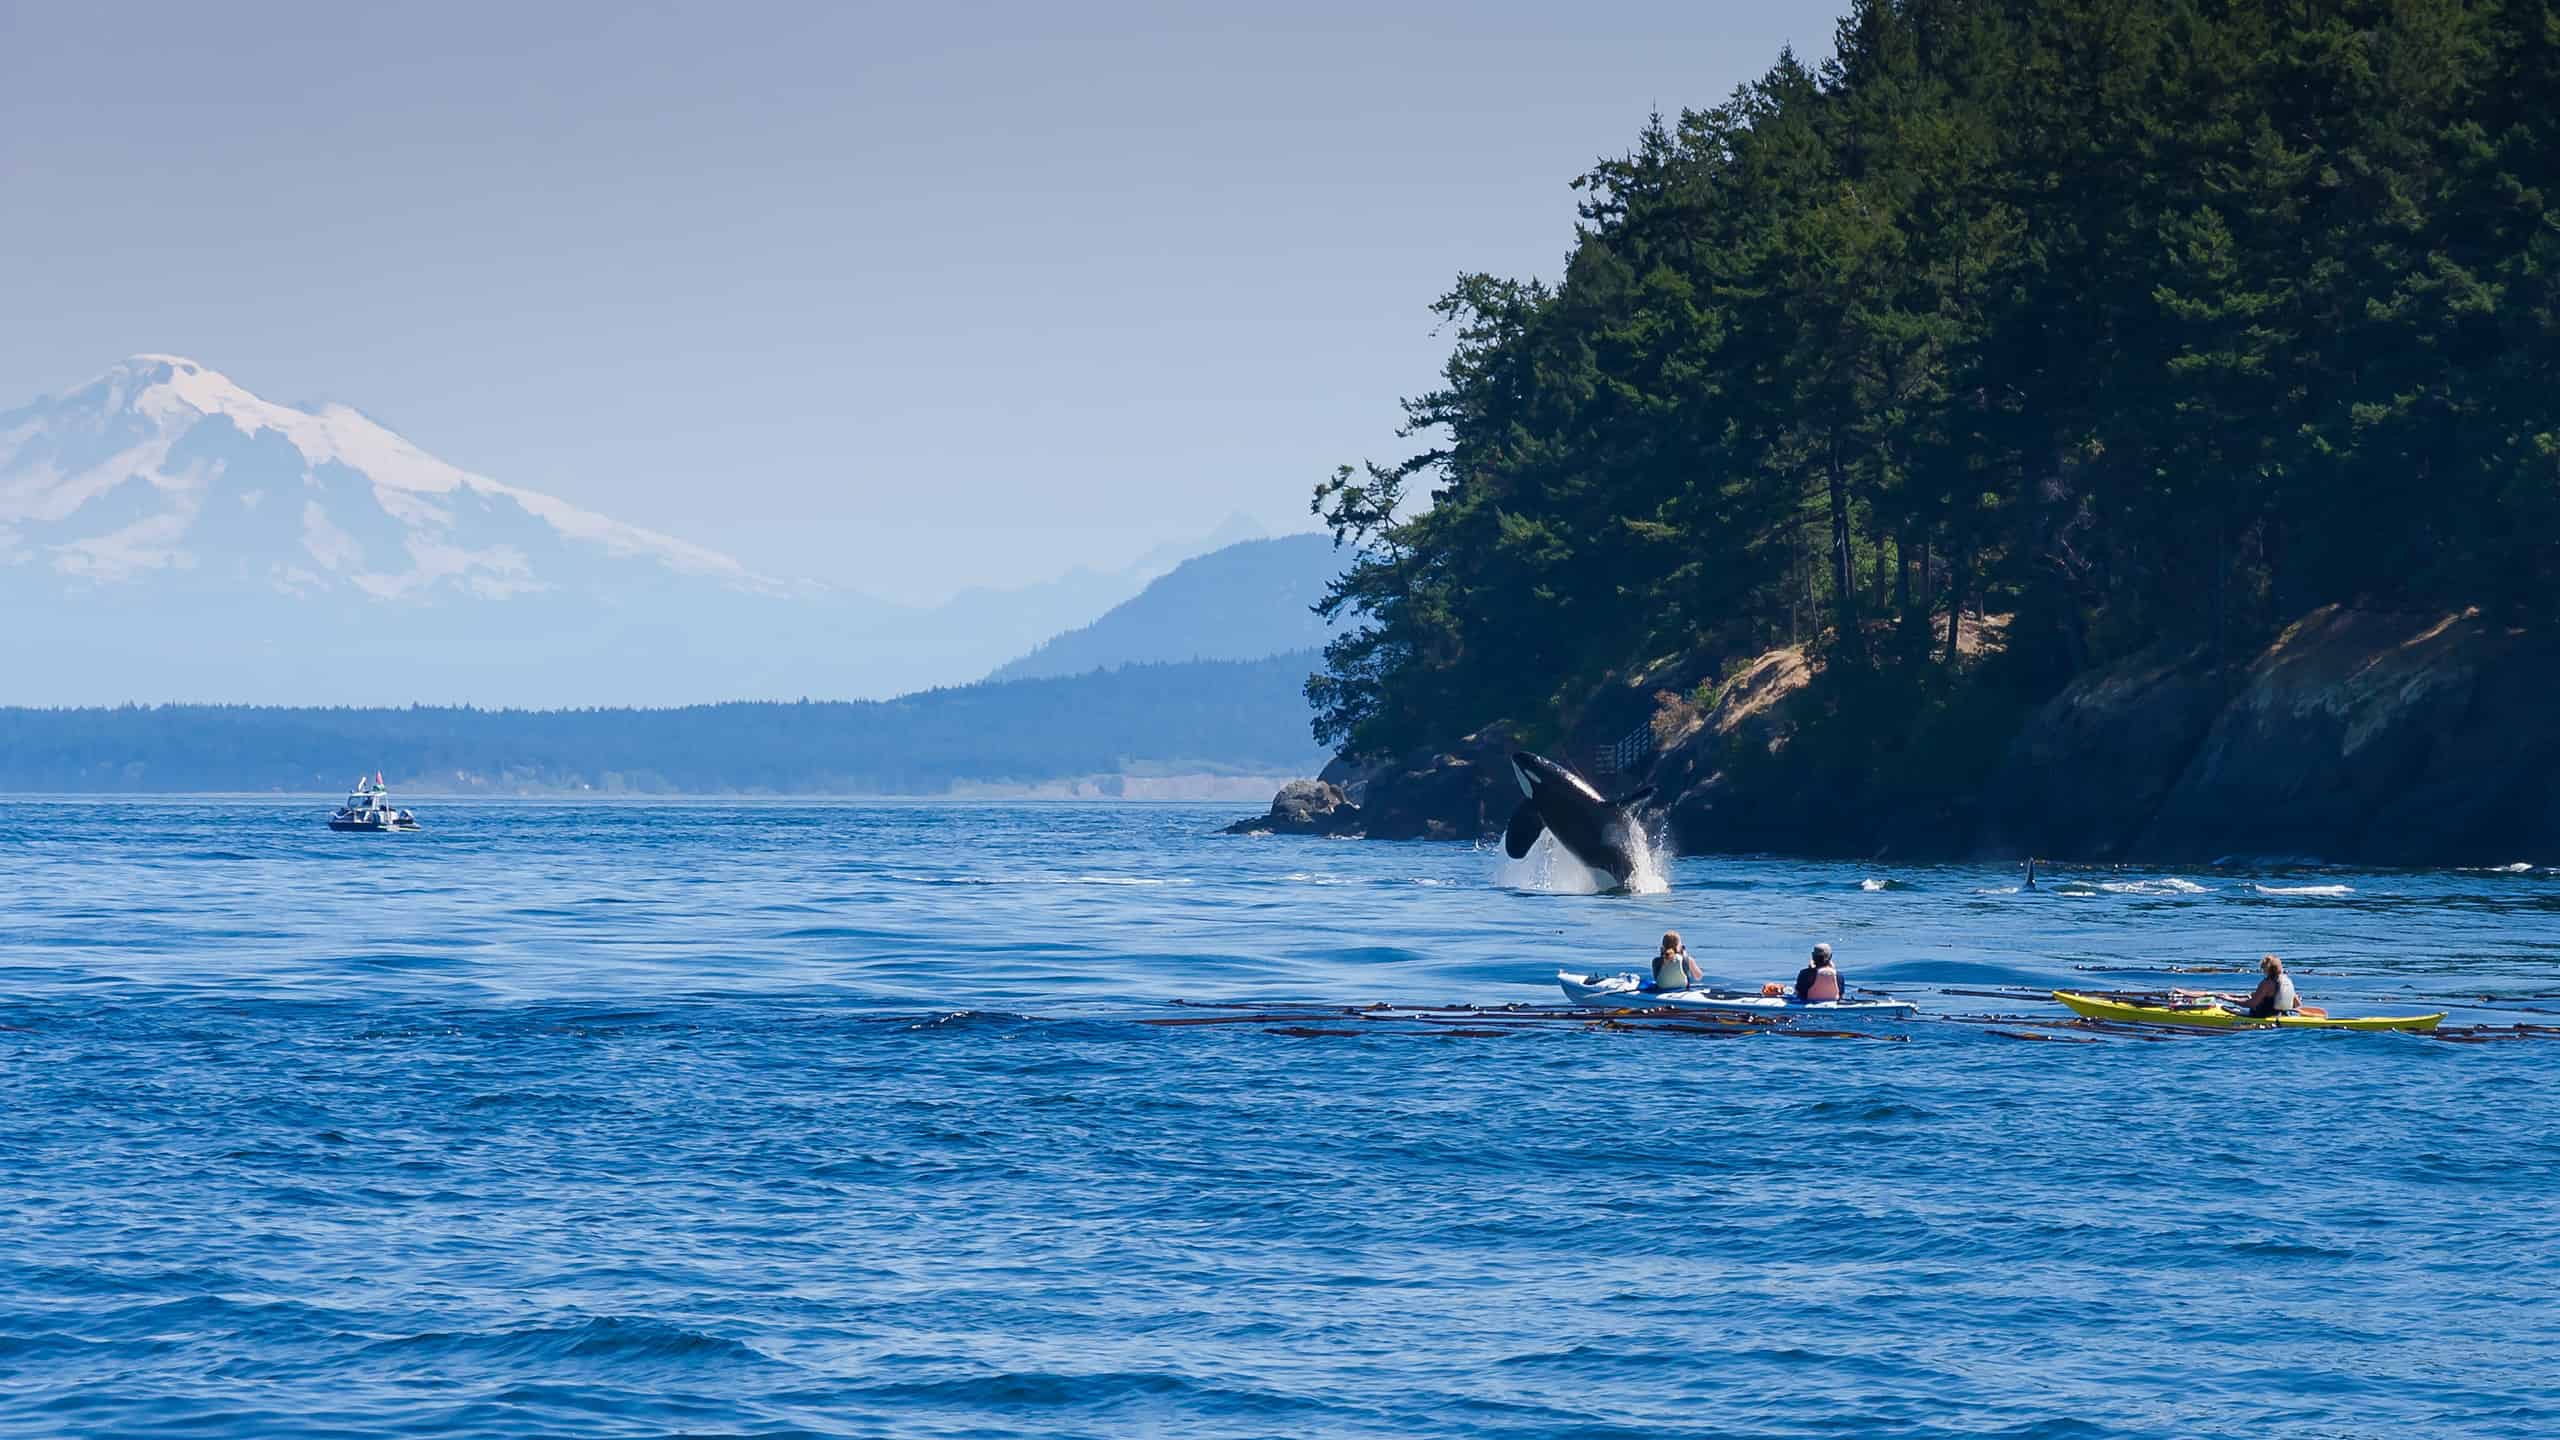 Kayaks watching a jumping orca killer whale